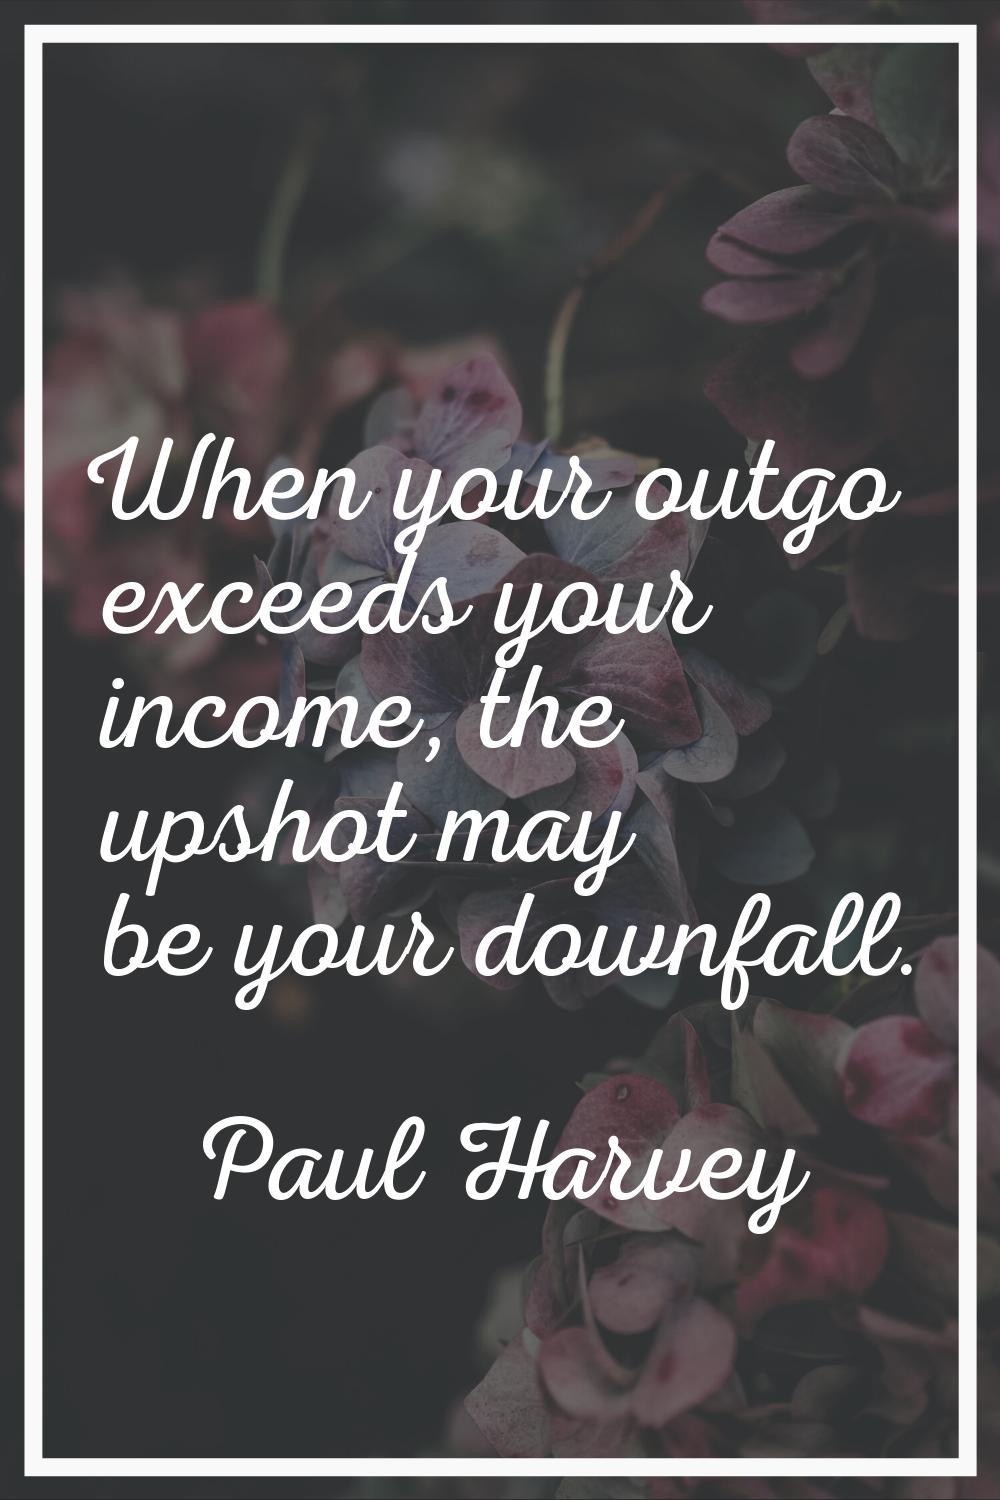 When your outgo exceeds your income, the upshot may be your downfall.